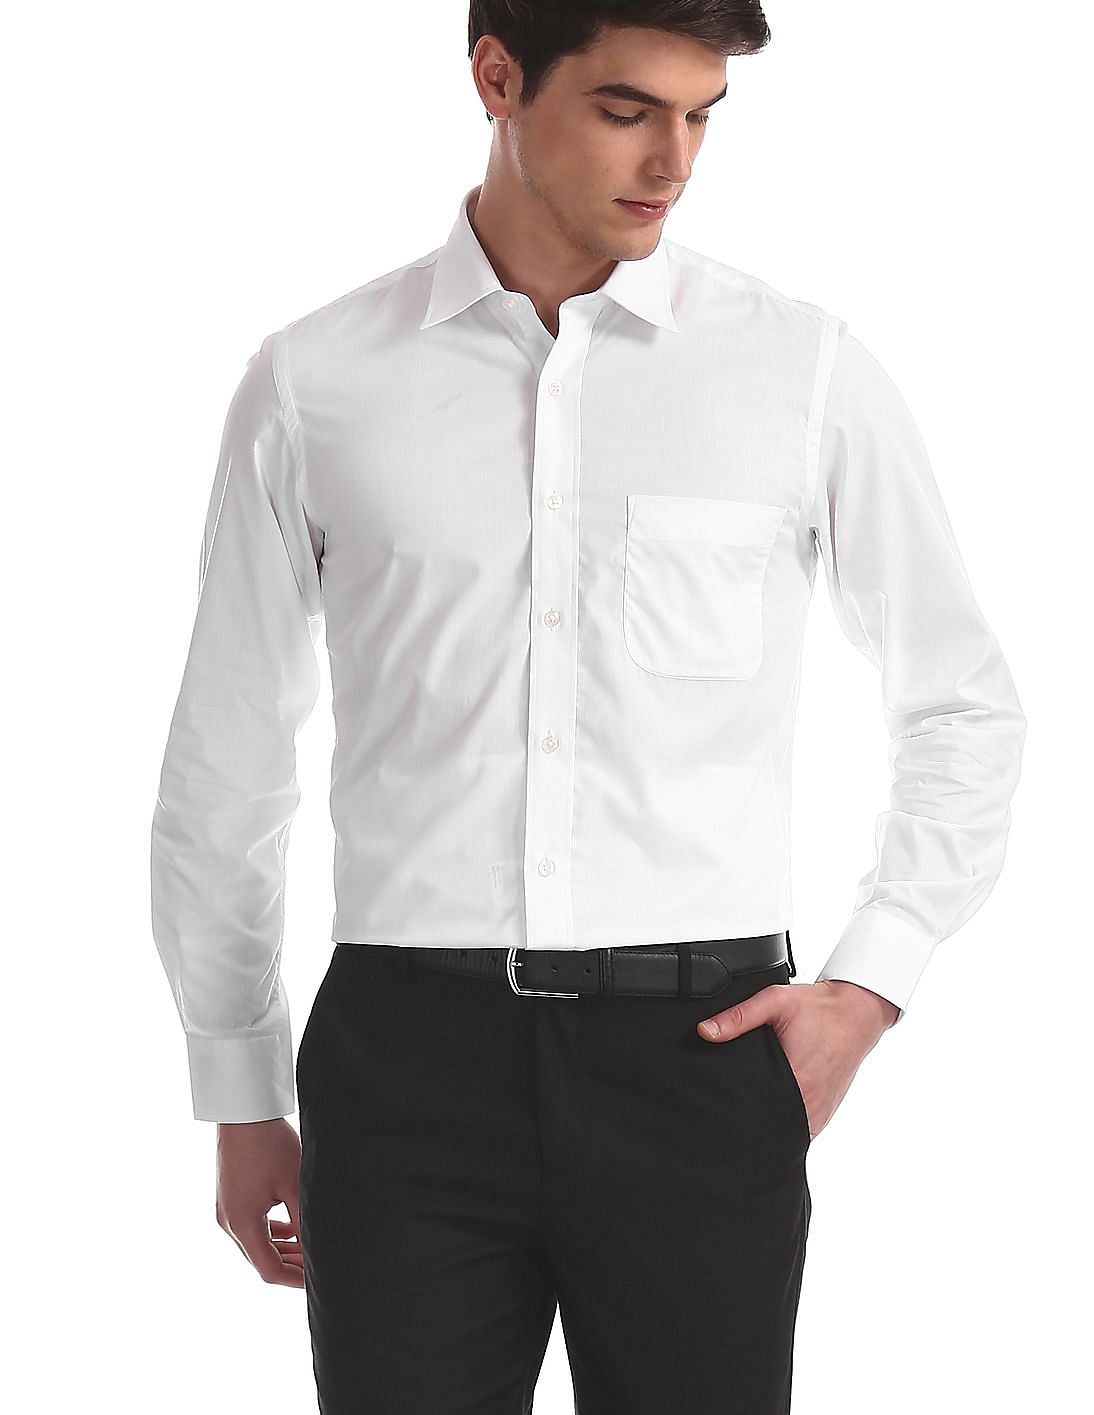 Buy Men White Patch Pocket Solid Shirt online at NNNOW.com